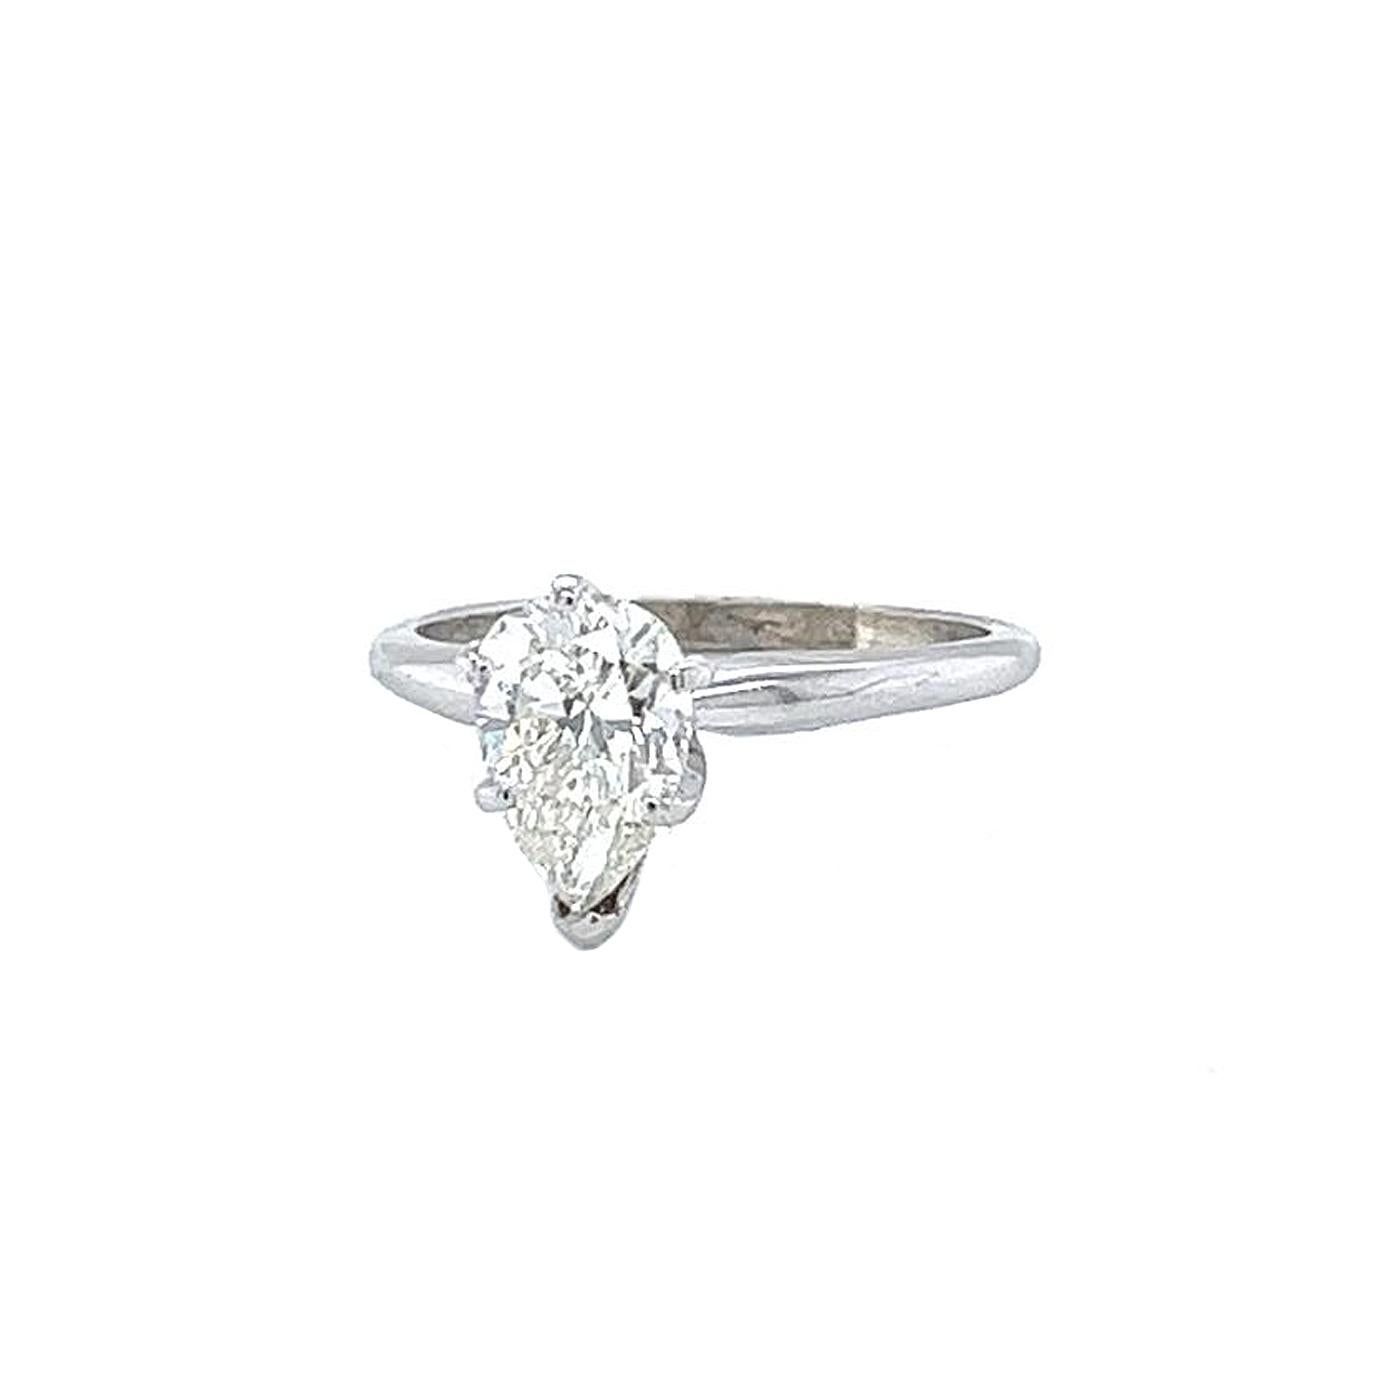 Modernist Flawless 1.92 Carat Pear-Shape Diamond Ring Antique Classic Fancy Jewelry For Sale